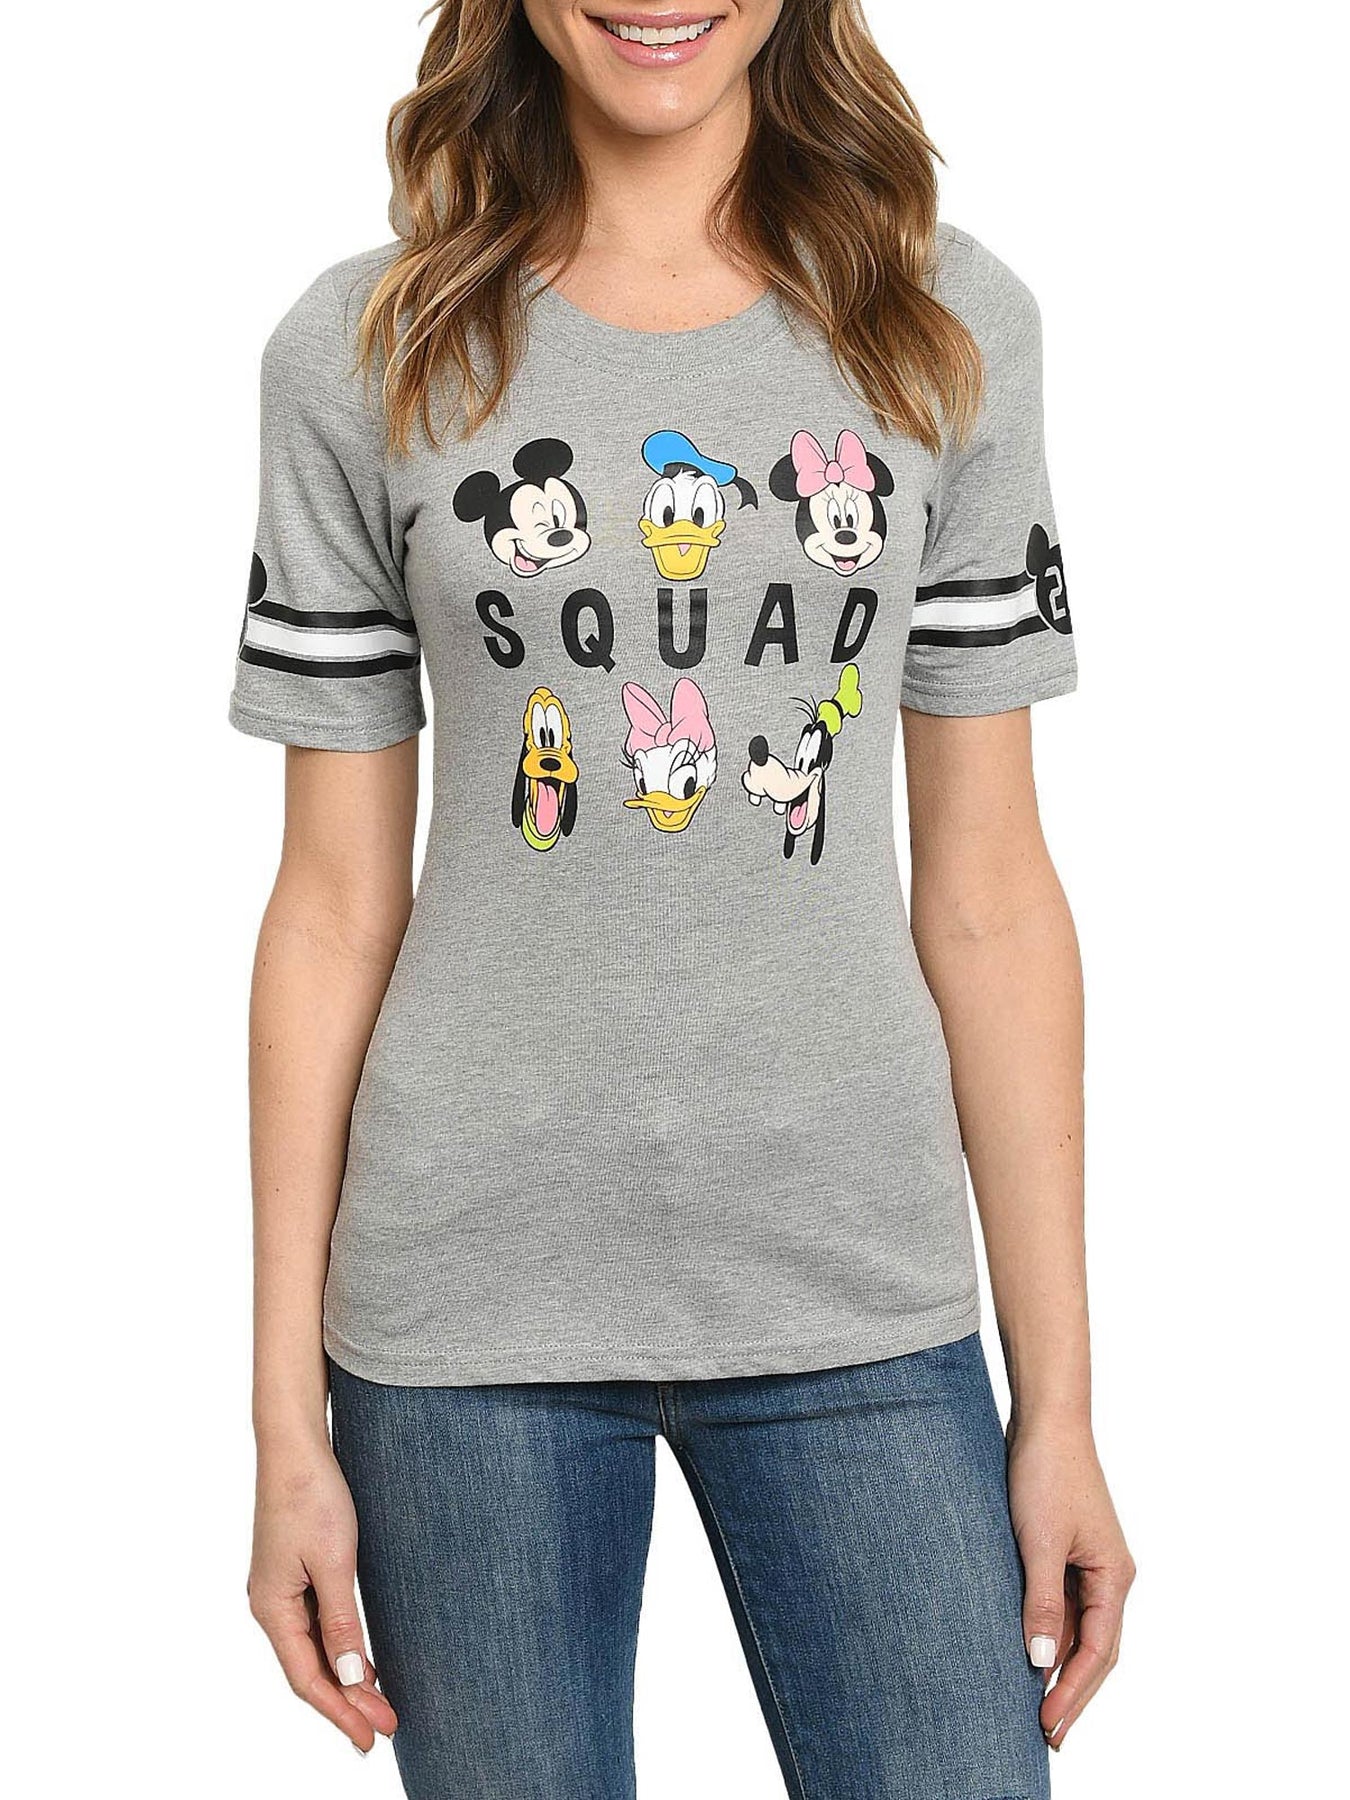 Junior Women Disney Squad T-shirt Front & Back Graphic Fitted